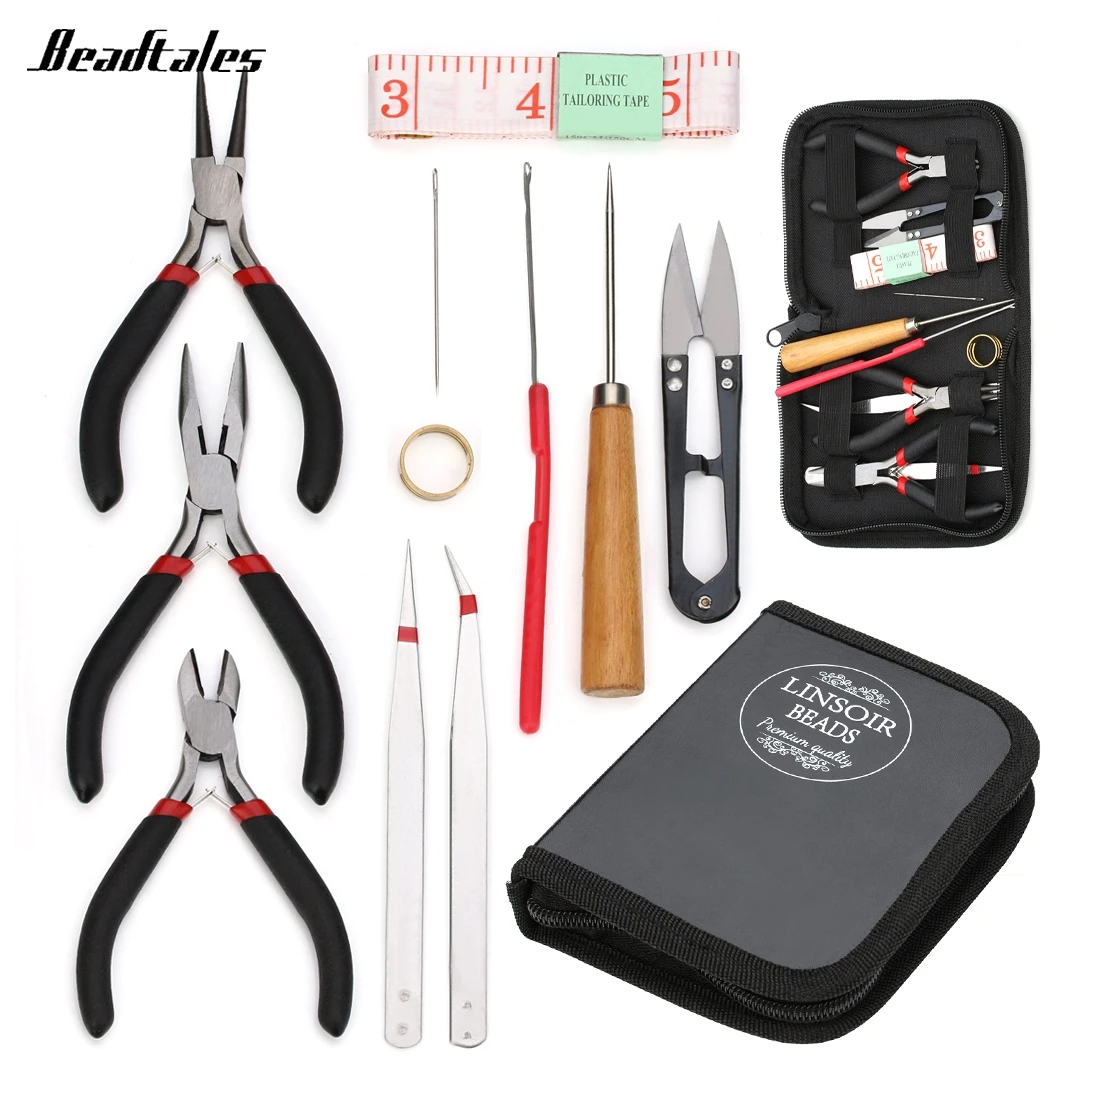 

Beadtales 12pcs/set Jewelry Tools Jewelry Making Set Flat Nose Pliers Beading Needles Kit Fit DIY Jewelry Making Tools Equipment